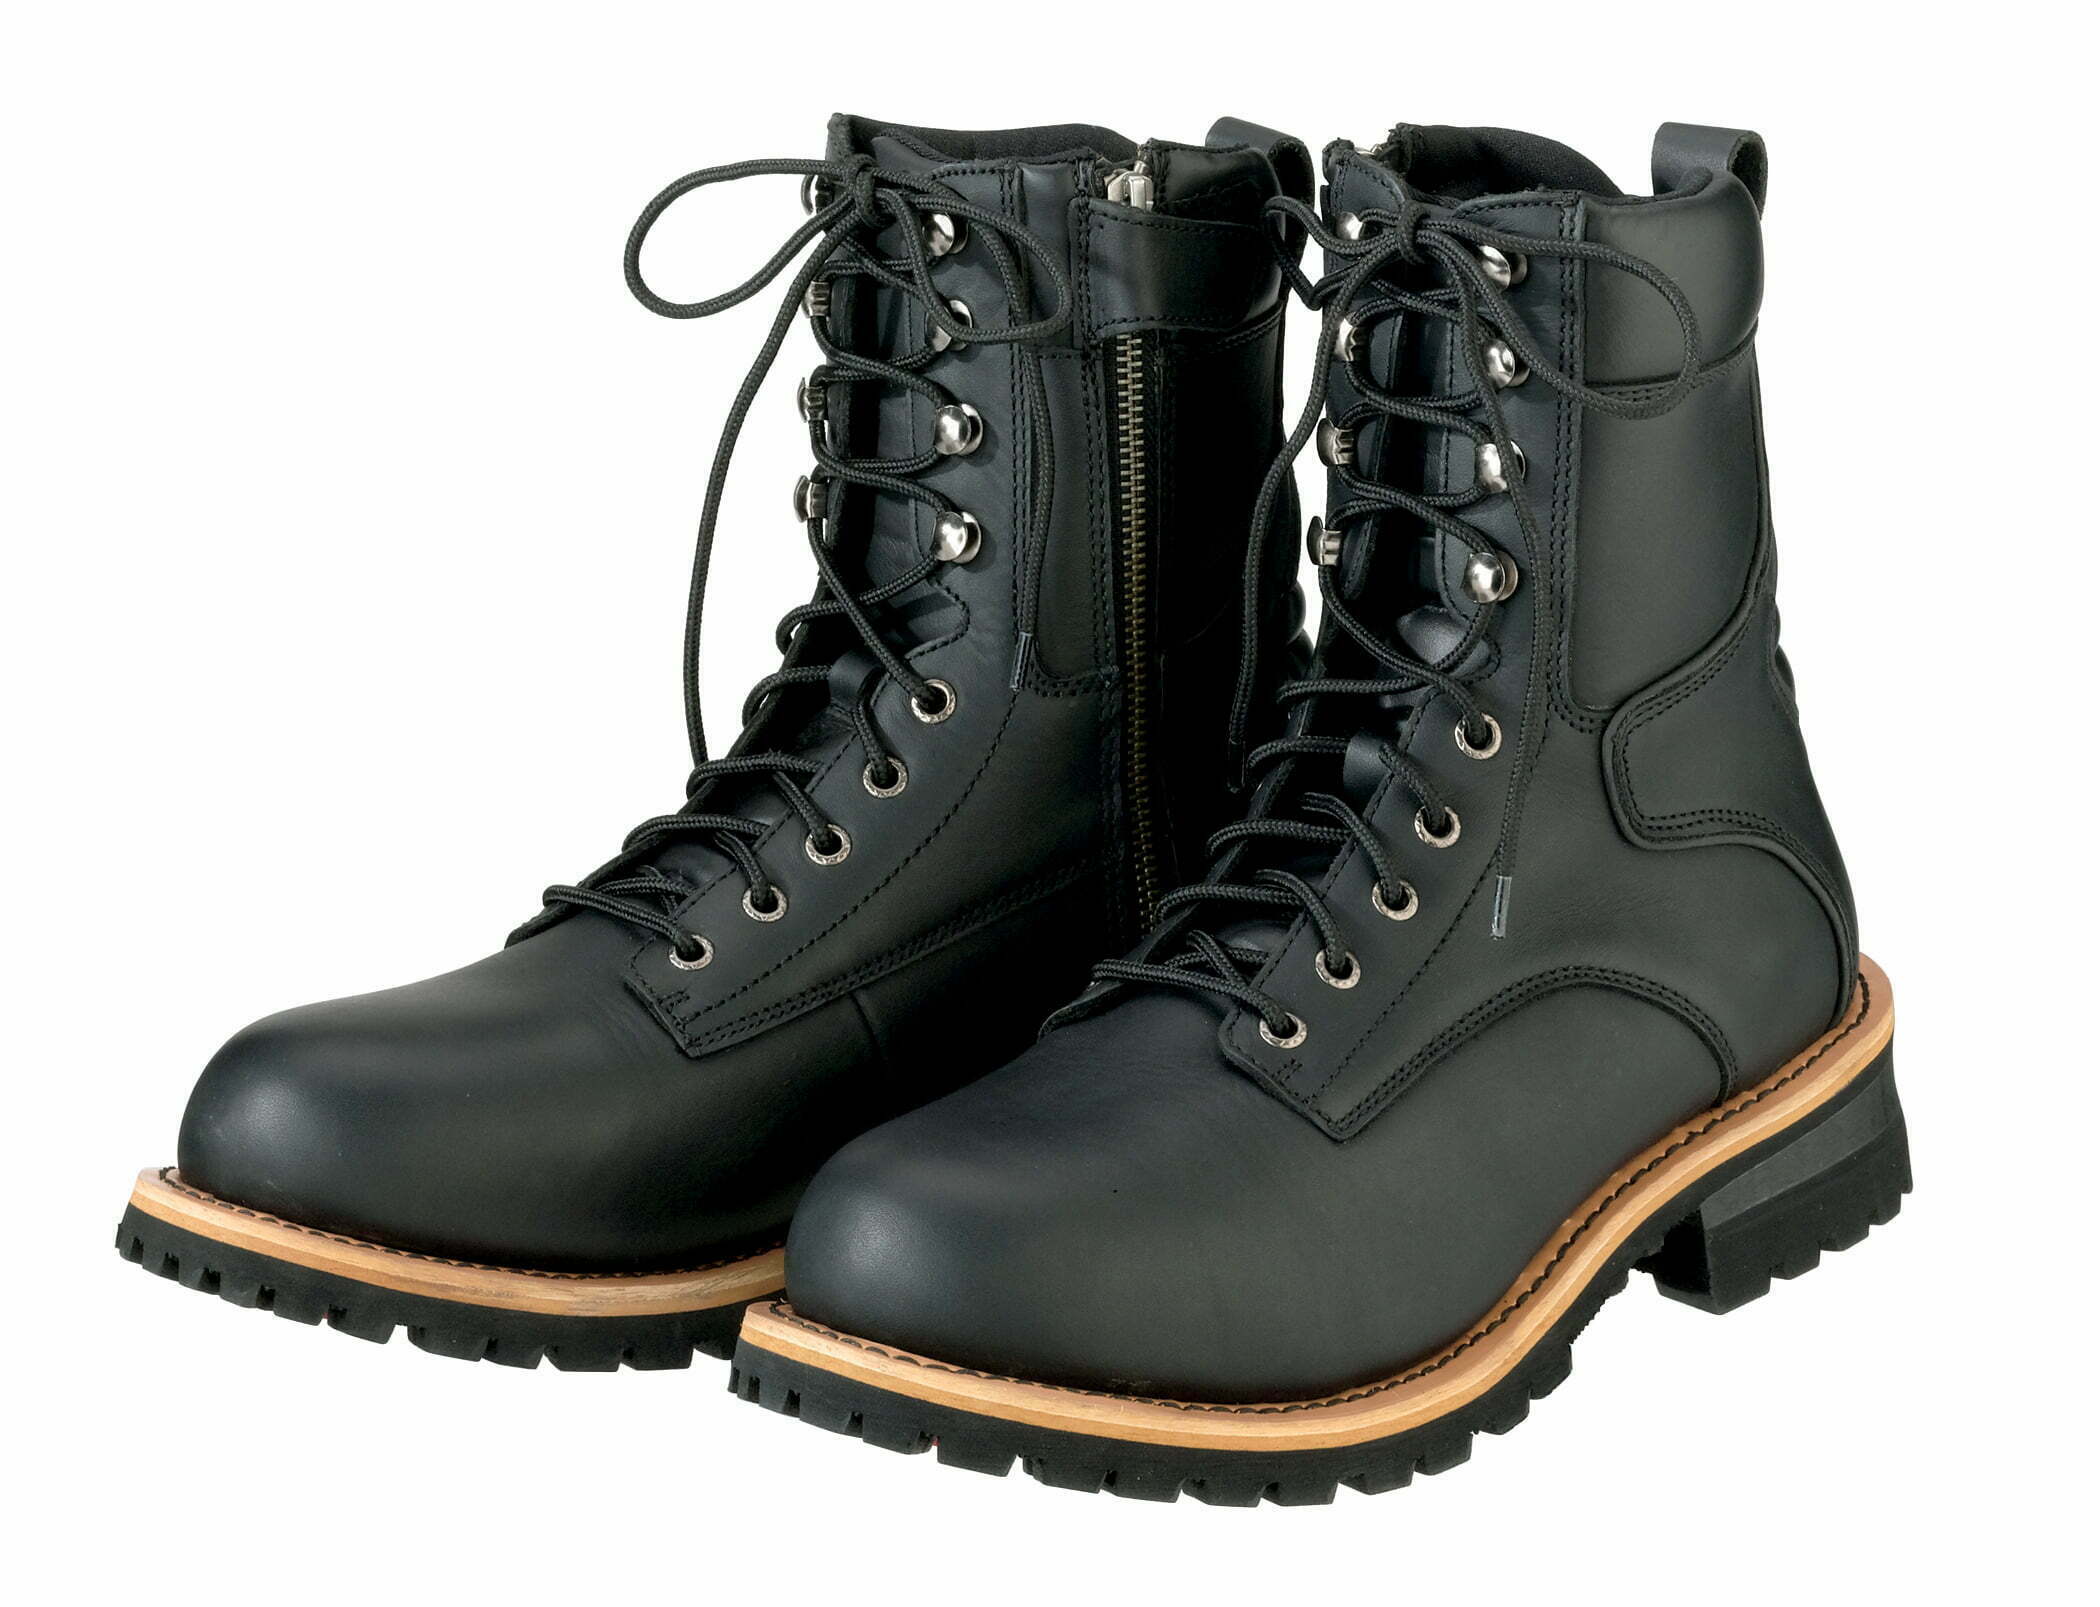 Z1R Men’s M4 and Women’s Savage Leather Boots | Hot Bike Magazine